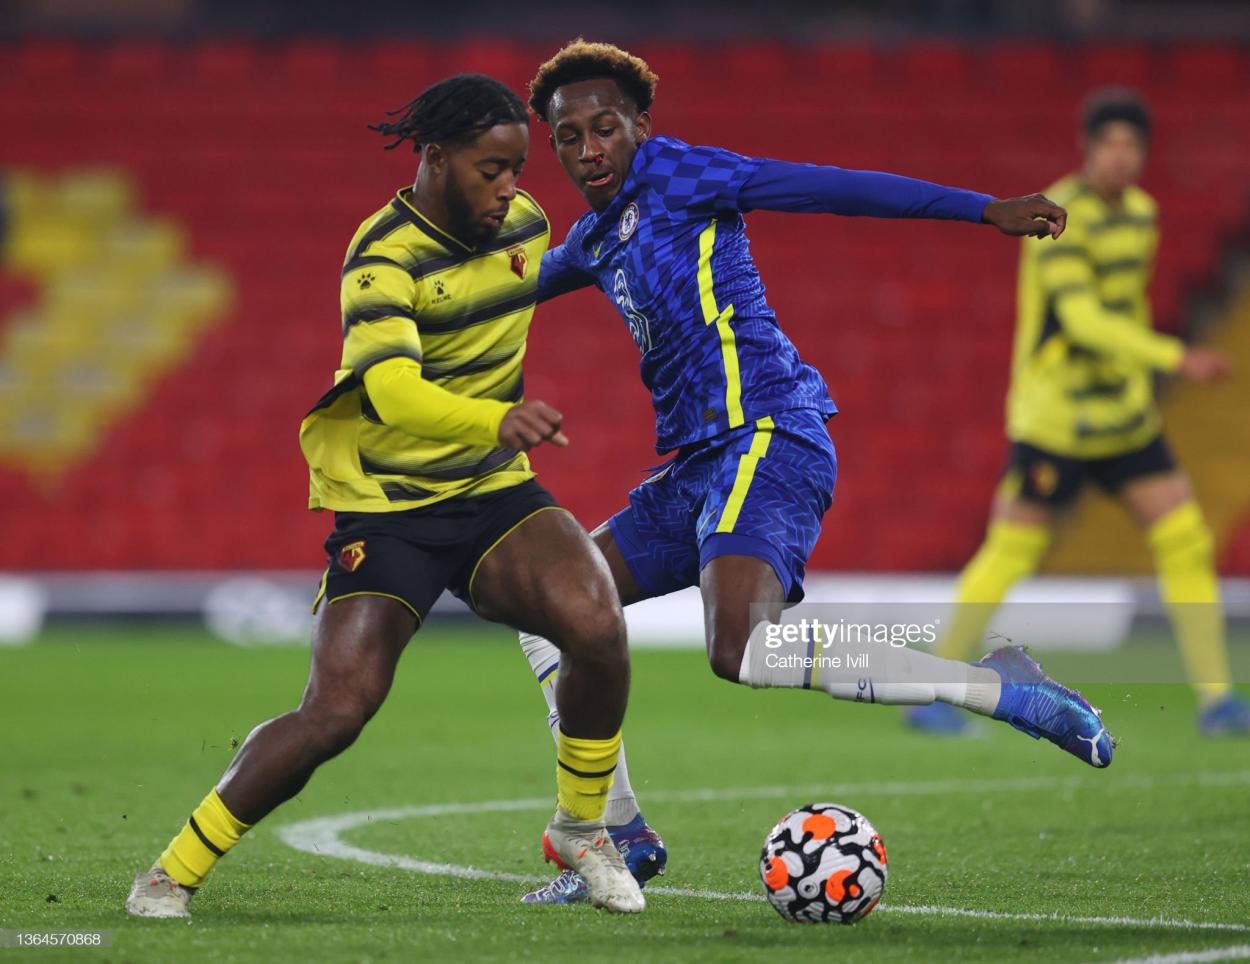 York's super striker Shaq Forde on the ball for parent club Watford (Photo by Catherine Ivill/Getty Images)